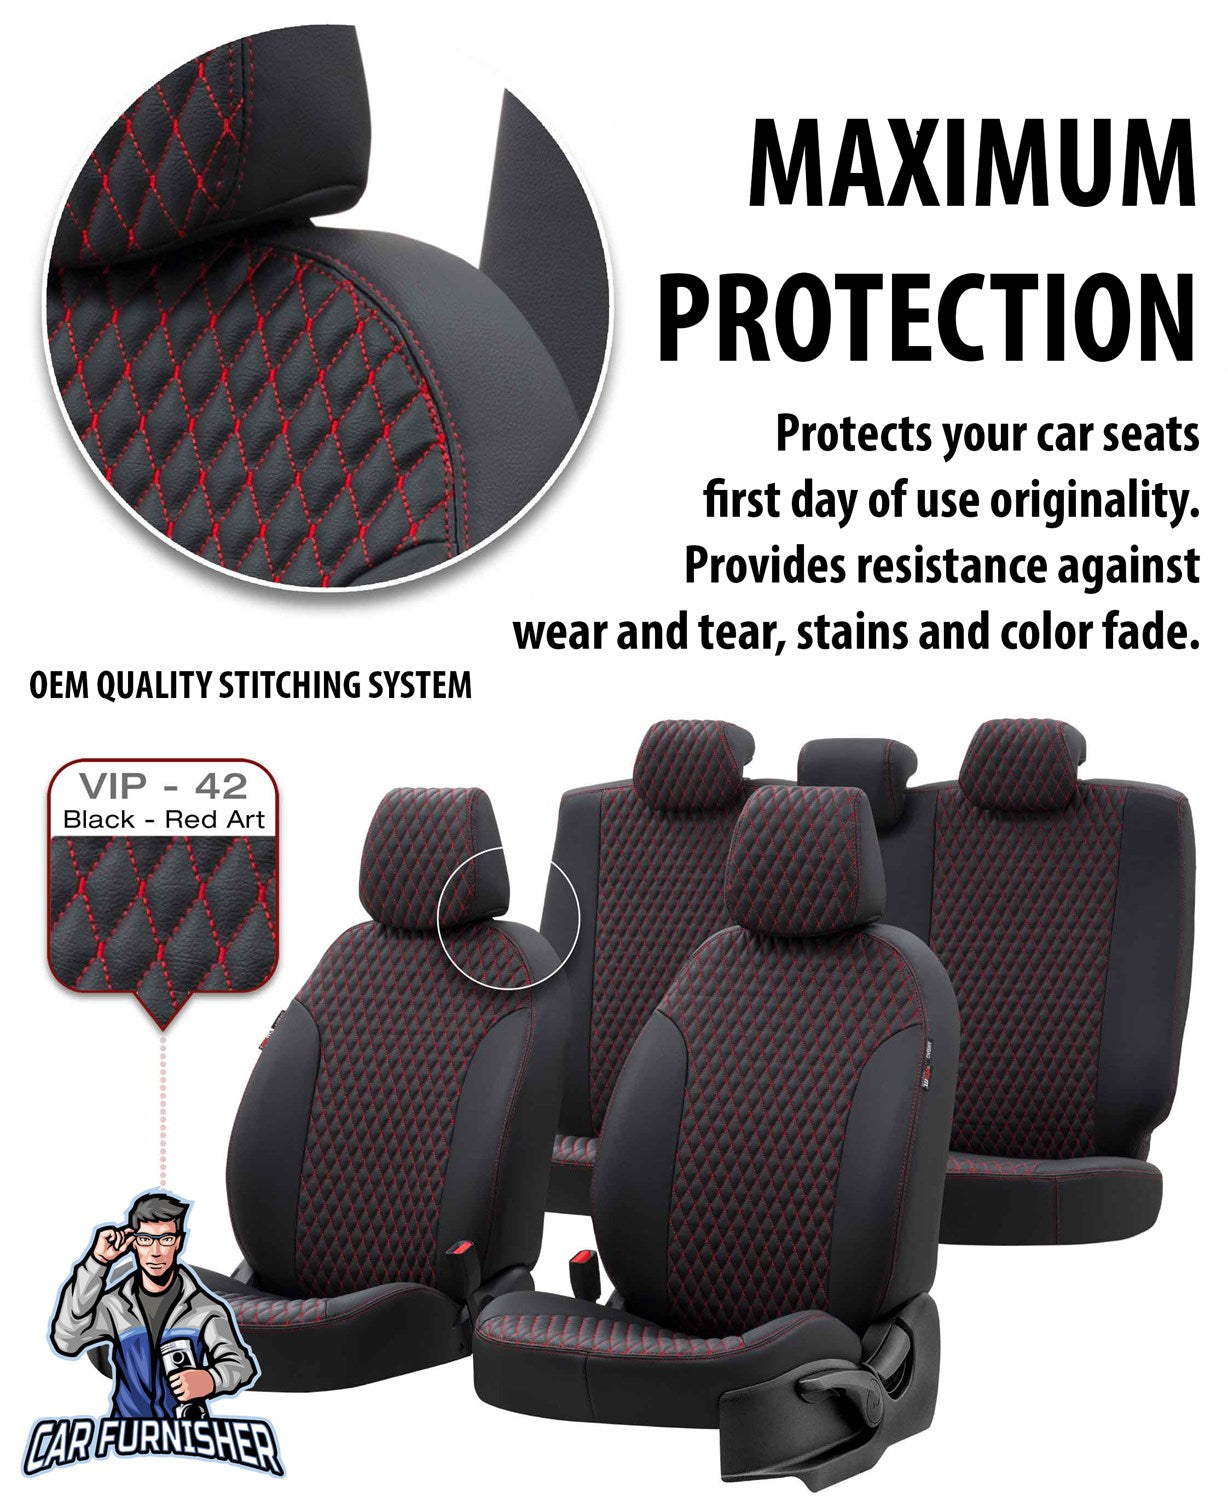 Isuzu D-Max Seat Covers Amsterdam Leather Design Ivory Leather